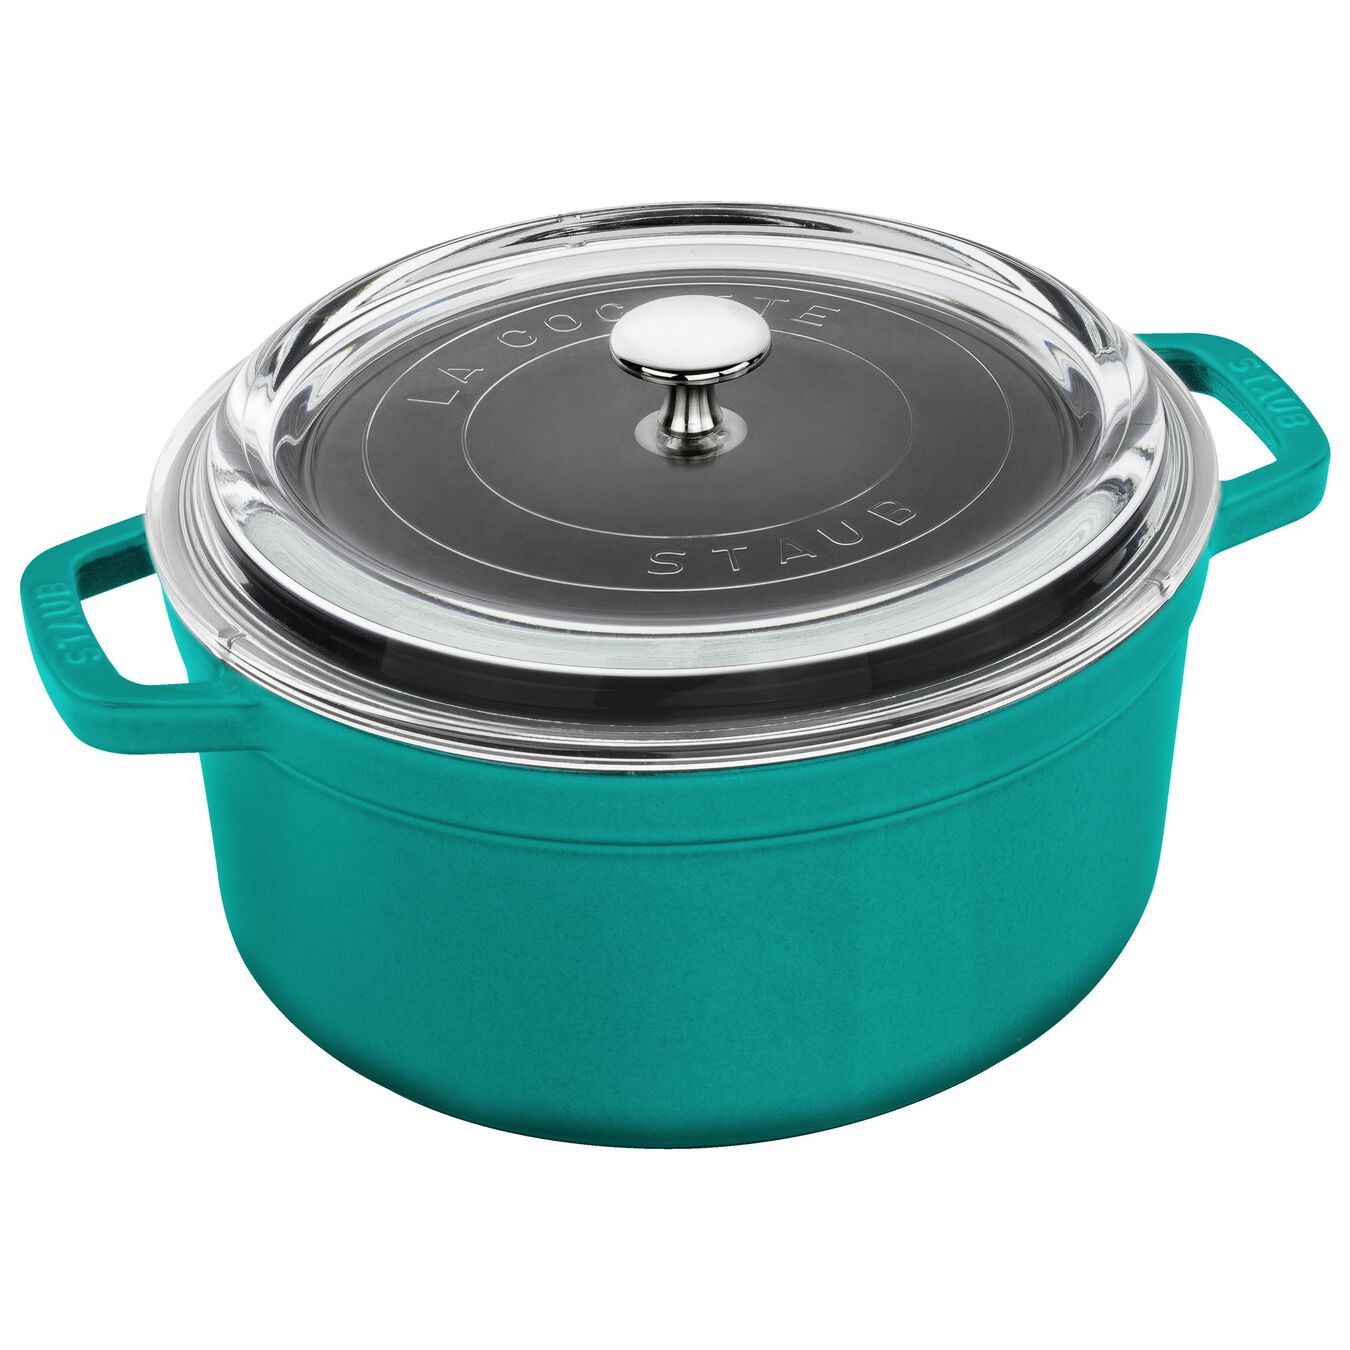 4 qt, round,  Glass Lid Cocotte, turquoise,,large 1